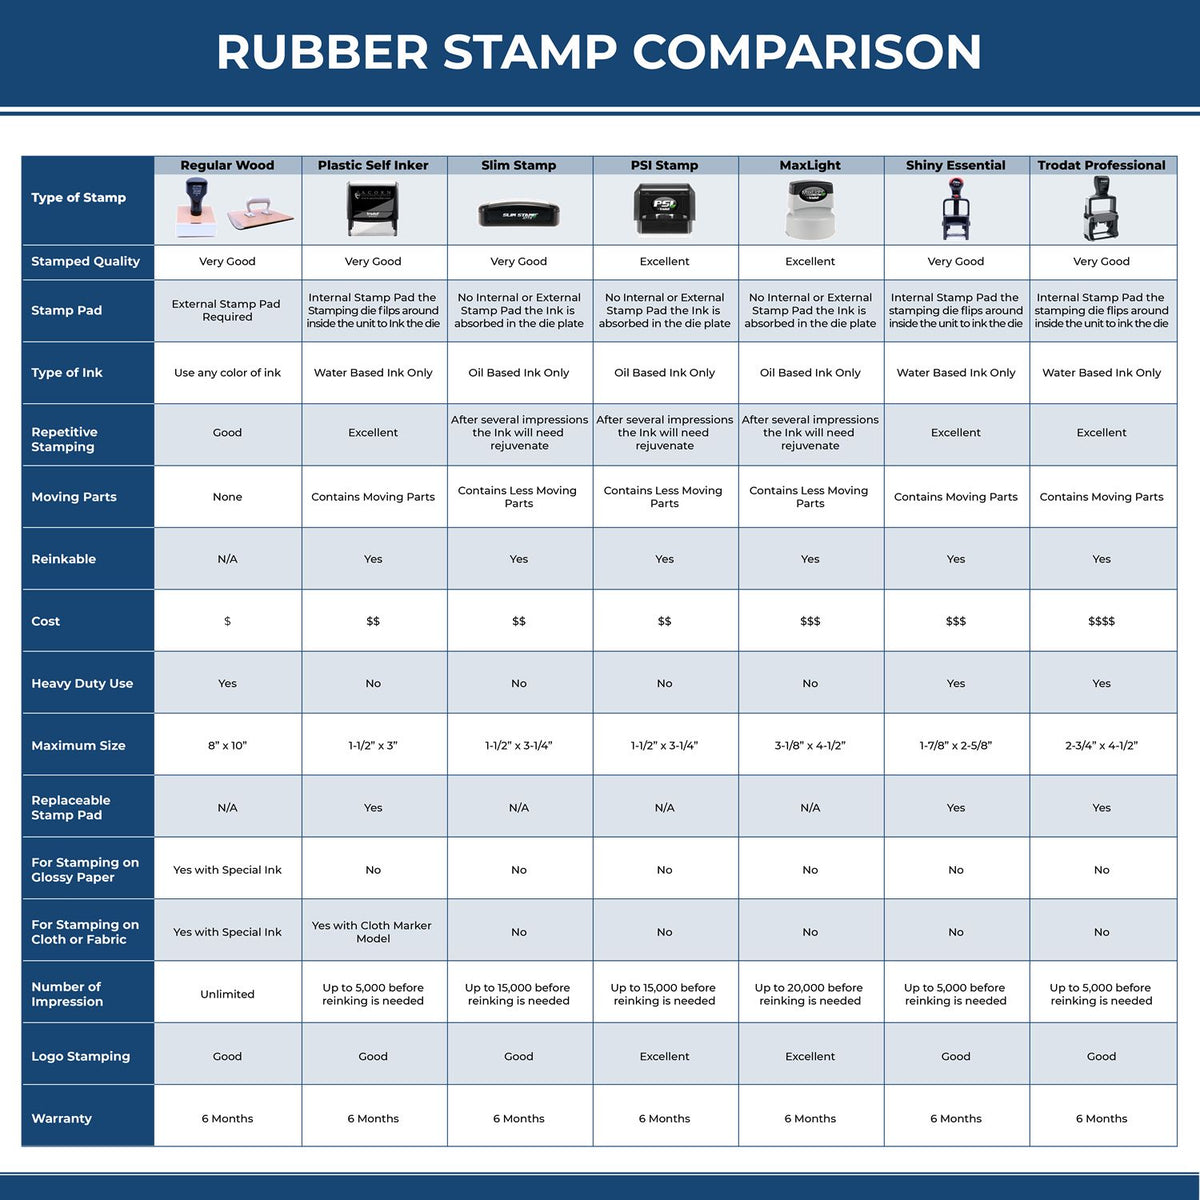 A comparison chart for the different types of mount models available for the Nebraska Professional Engineer Seal Stamp.